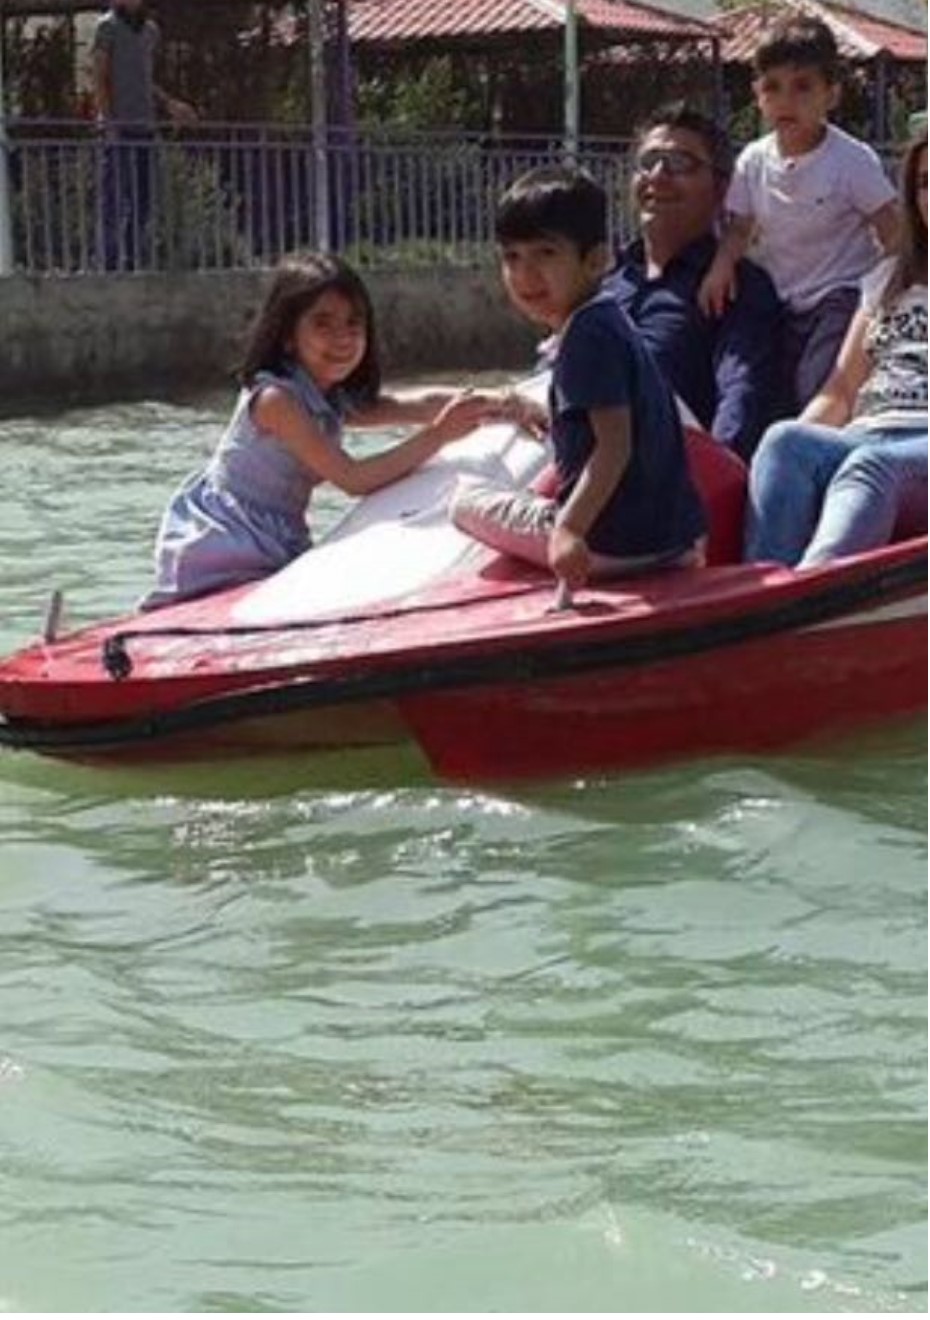 when the boat was used for fun during vacations